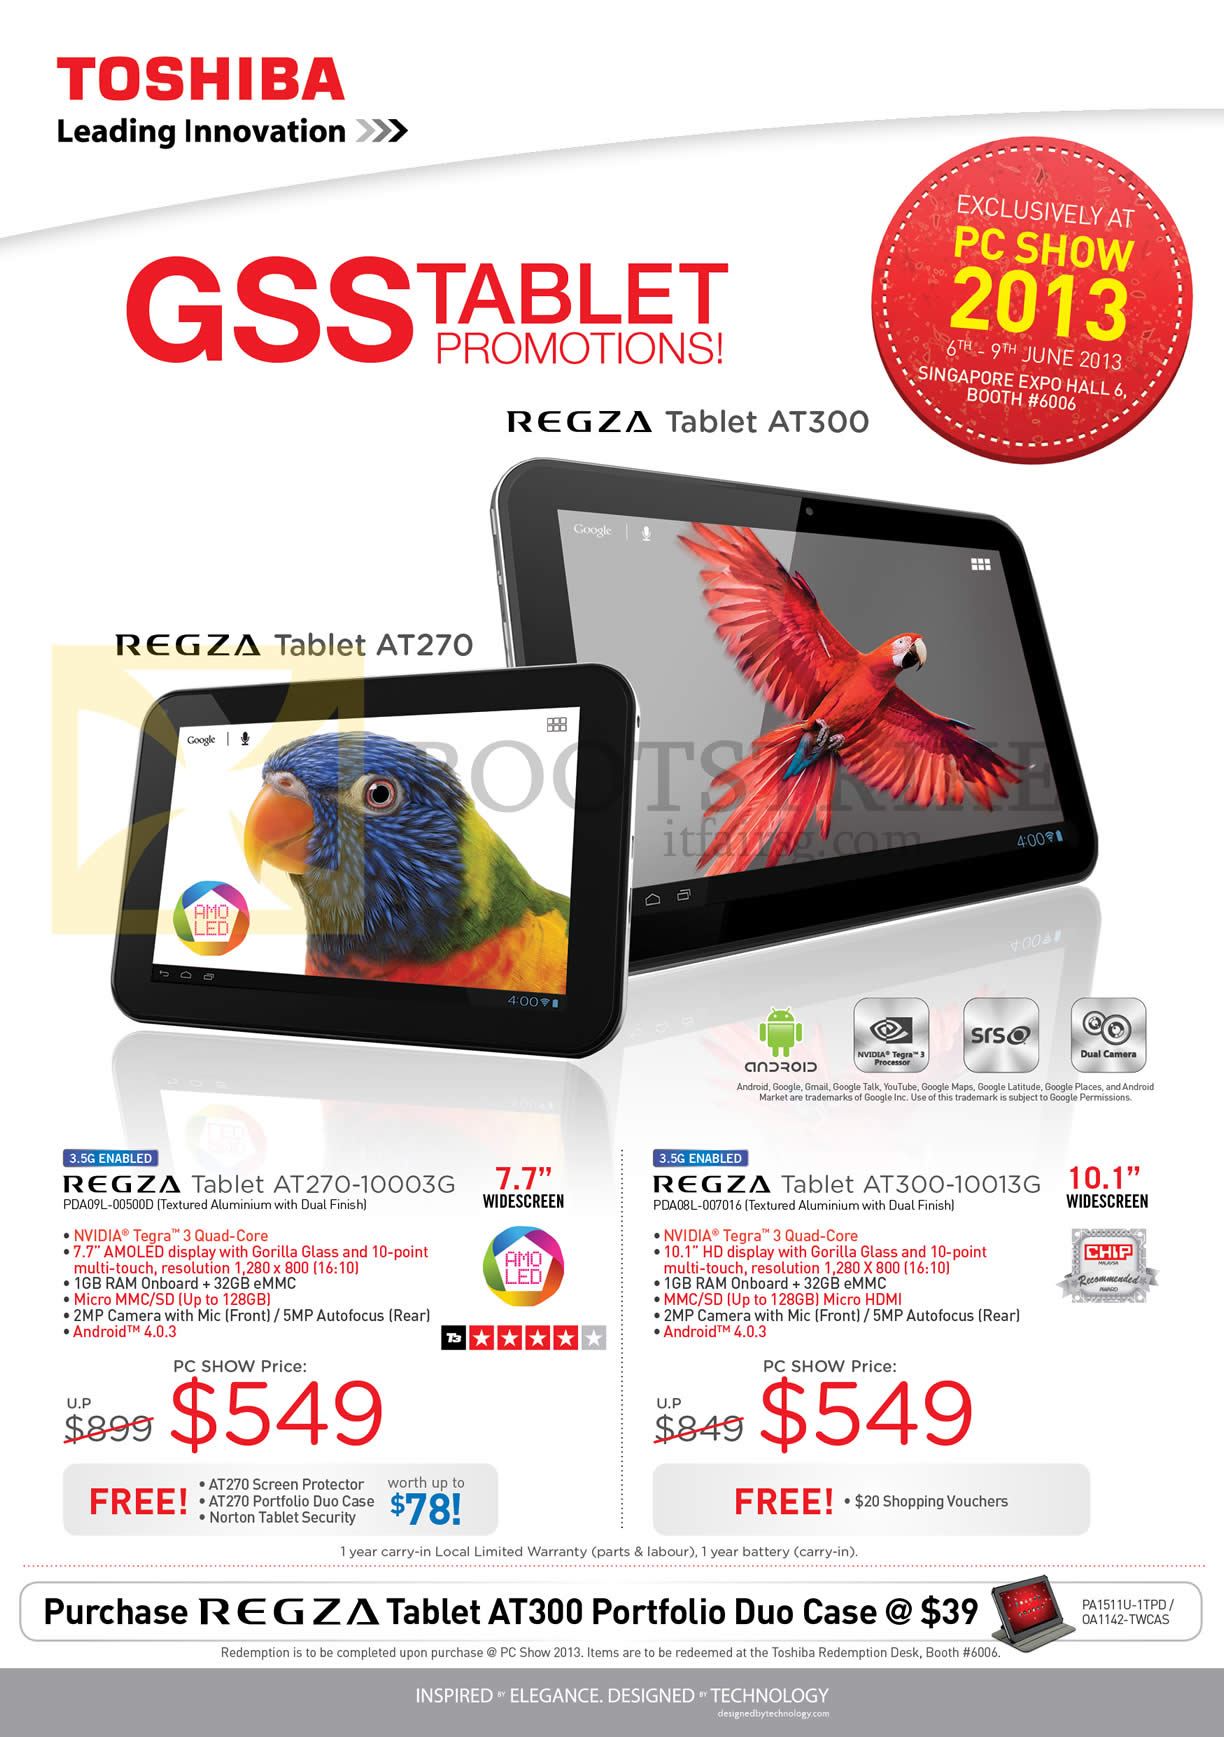 PC SHOW 2013 price list image brochure of Toshiba Tablets Regza AT270-10003G, AT300-10013G